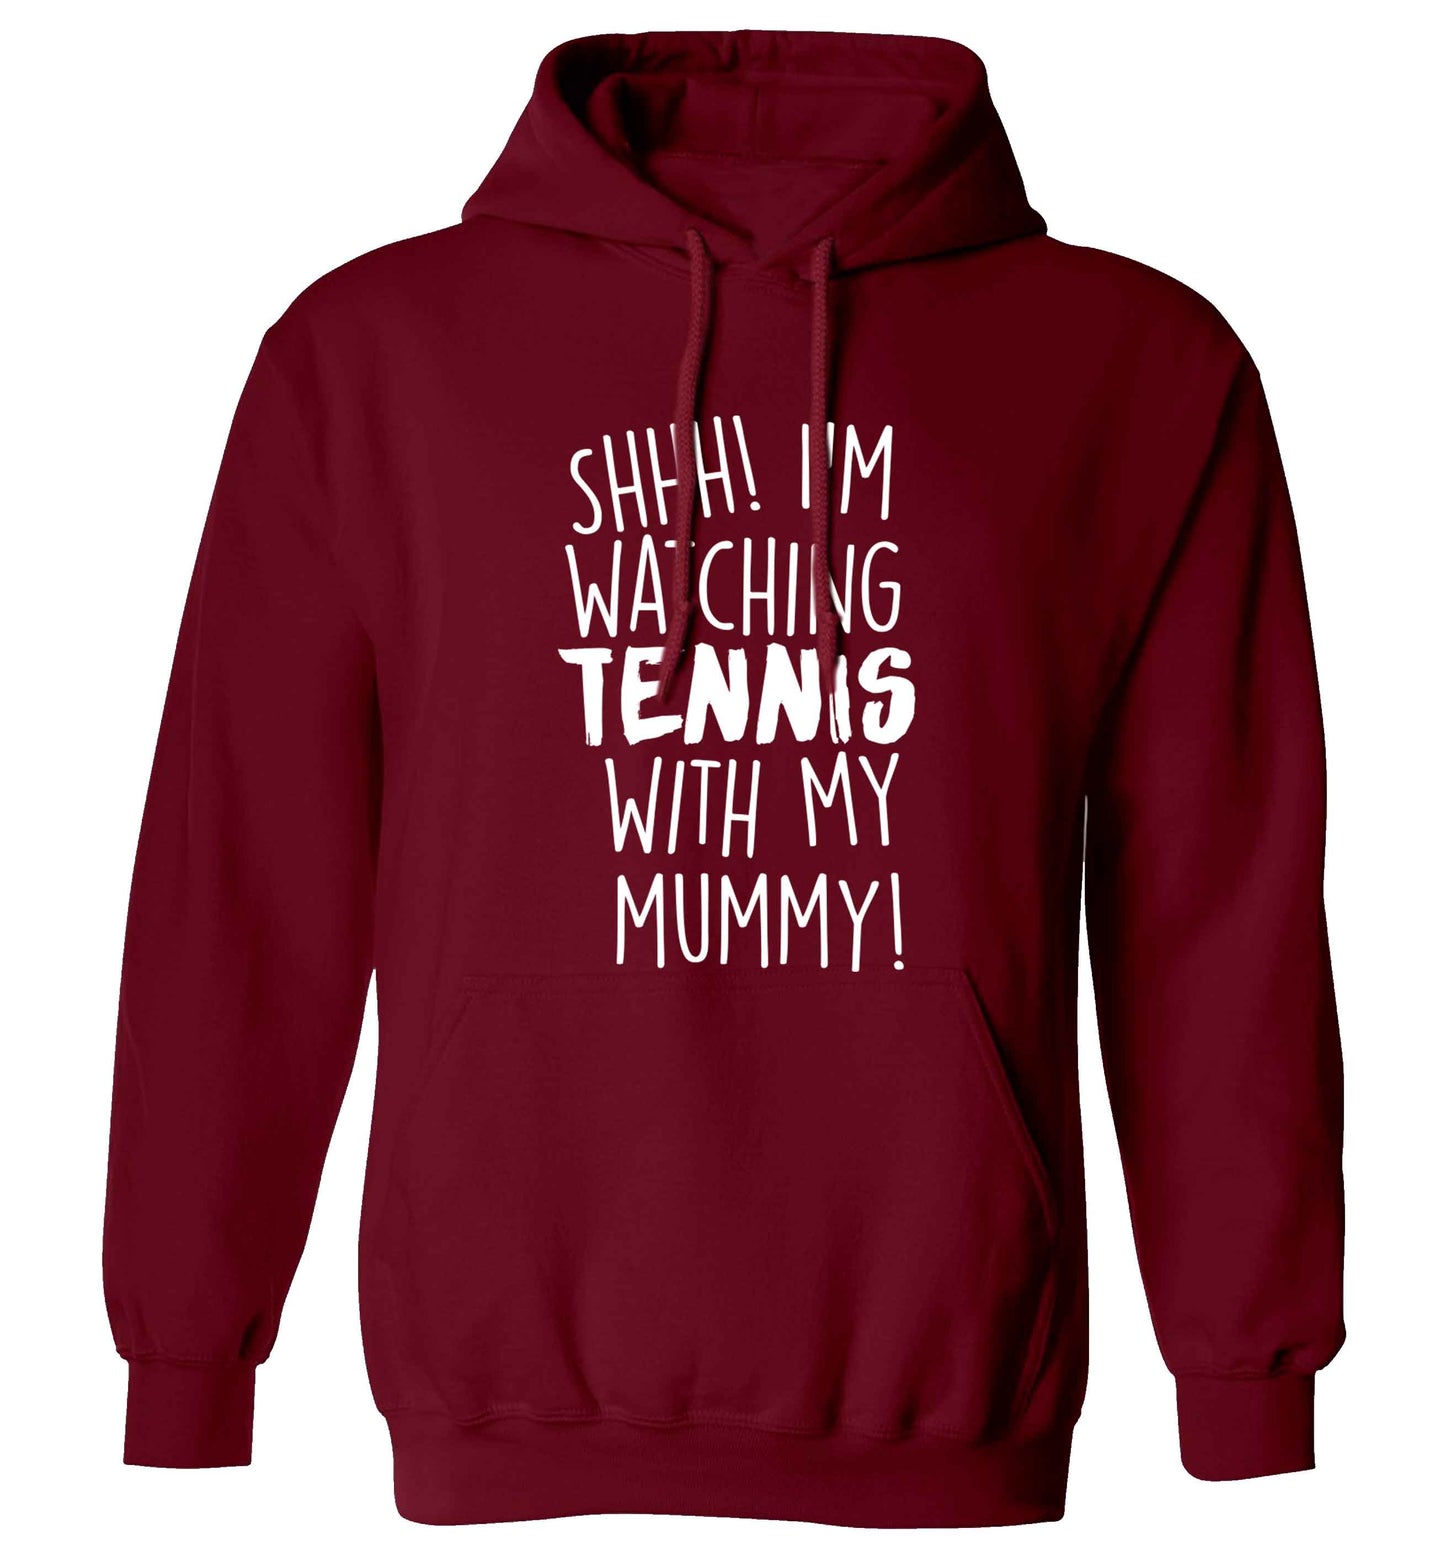 Shh! I'm watching tennis with my mummy! adults unisex maroon hoodie 2XL